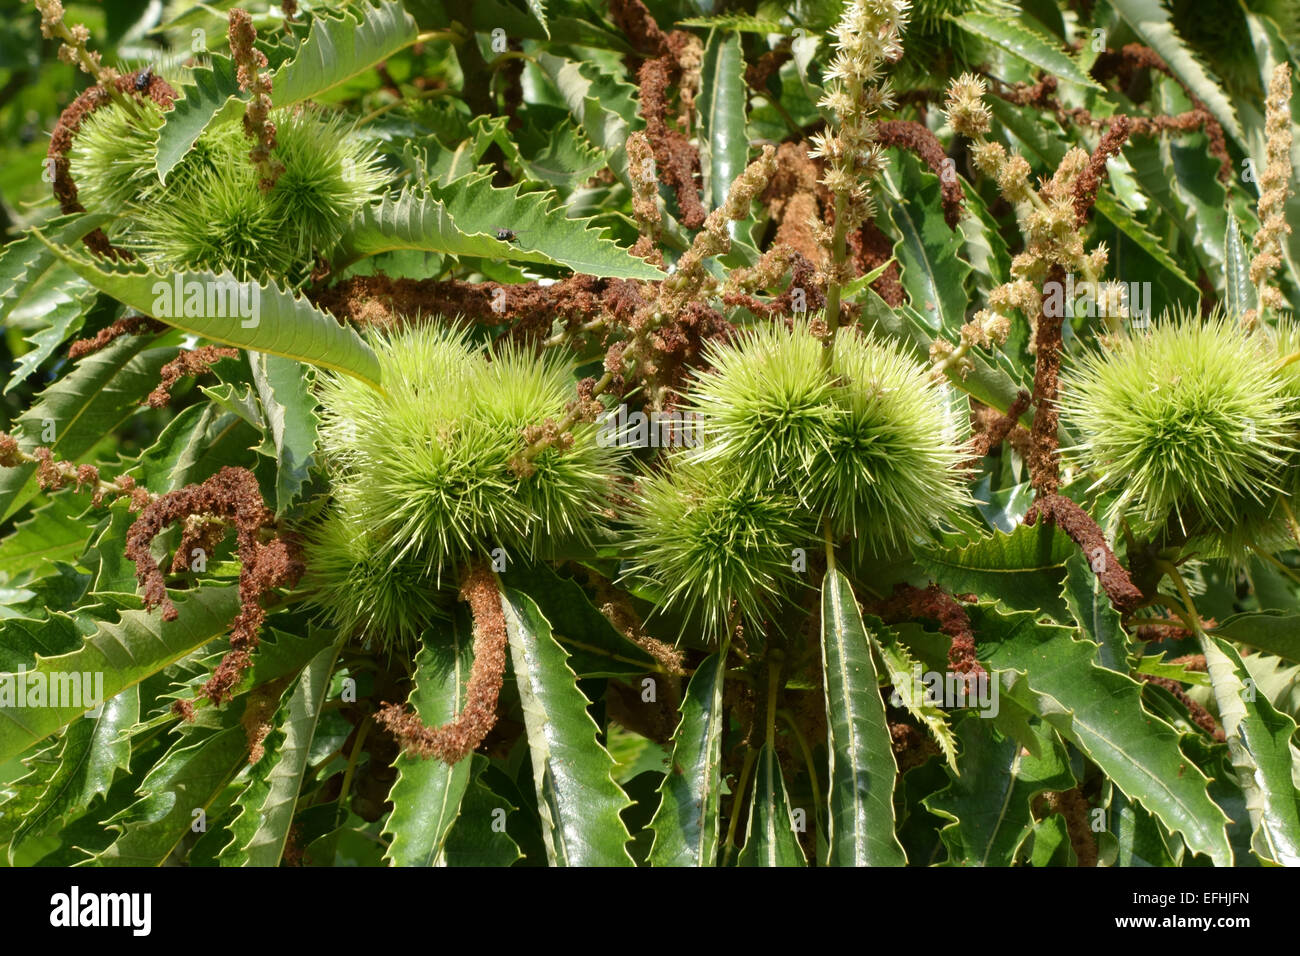 Foliage of a sweet chestnut tree, Castanea sativa, with prickly fruit containing the chestnuts, Berkshire, August Stock Photo